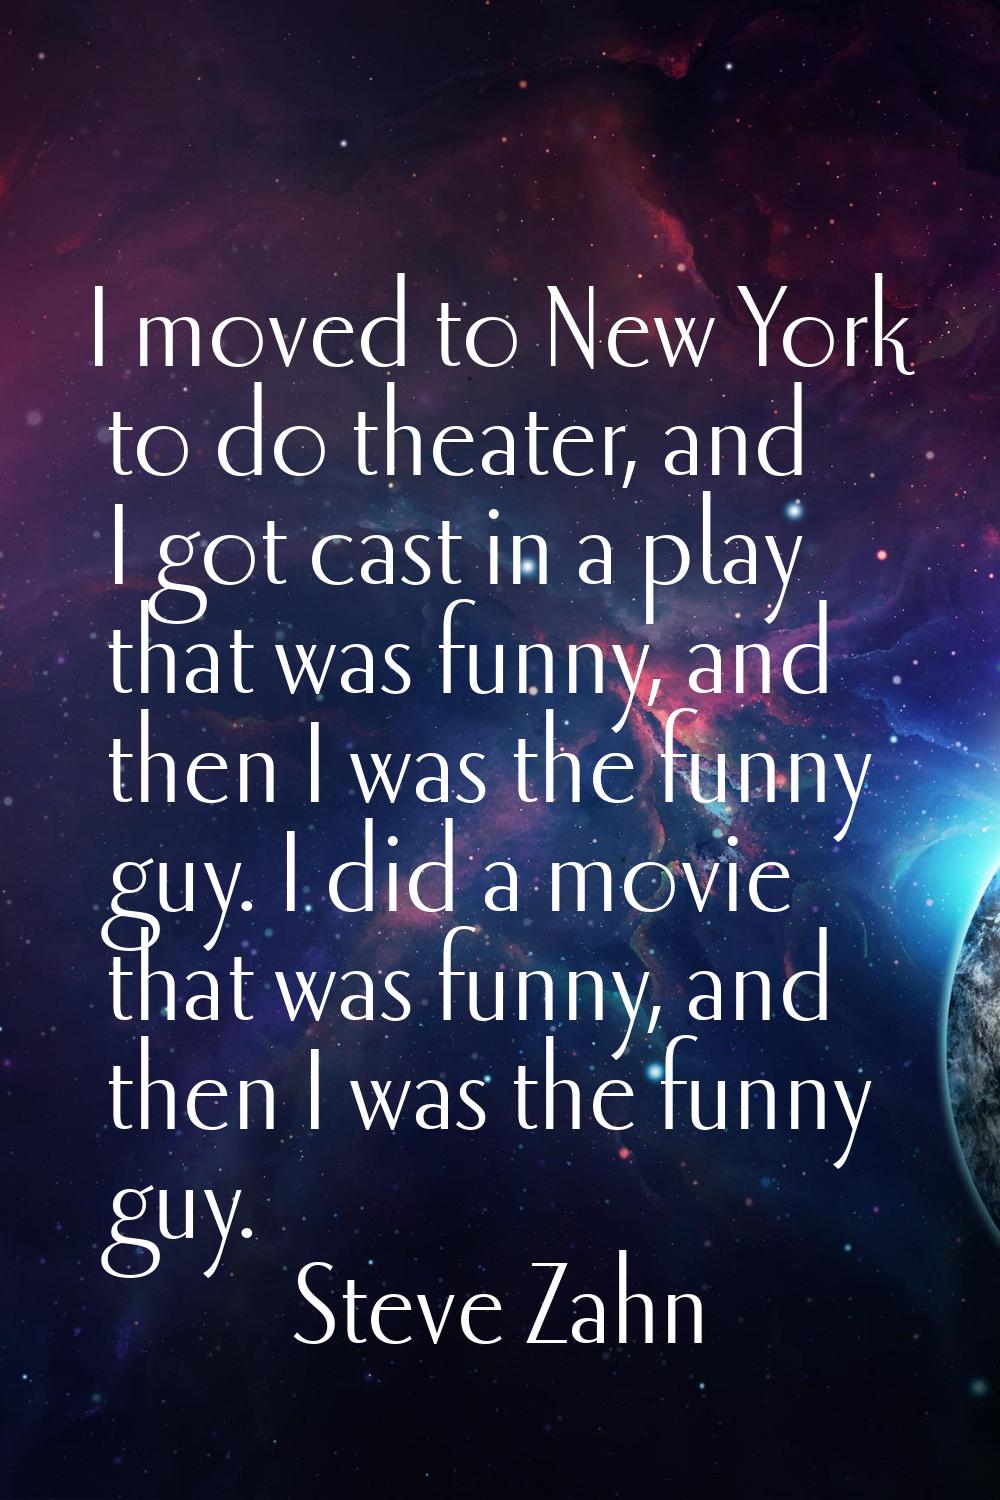 I moved to New York to do theater, and I got cast in a play that was funny, and then I was the funn